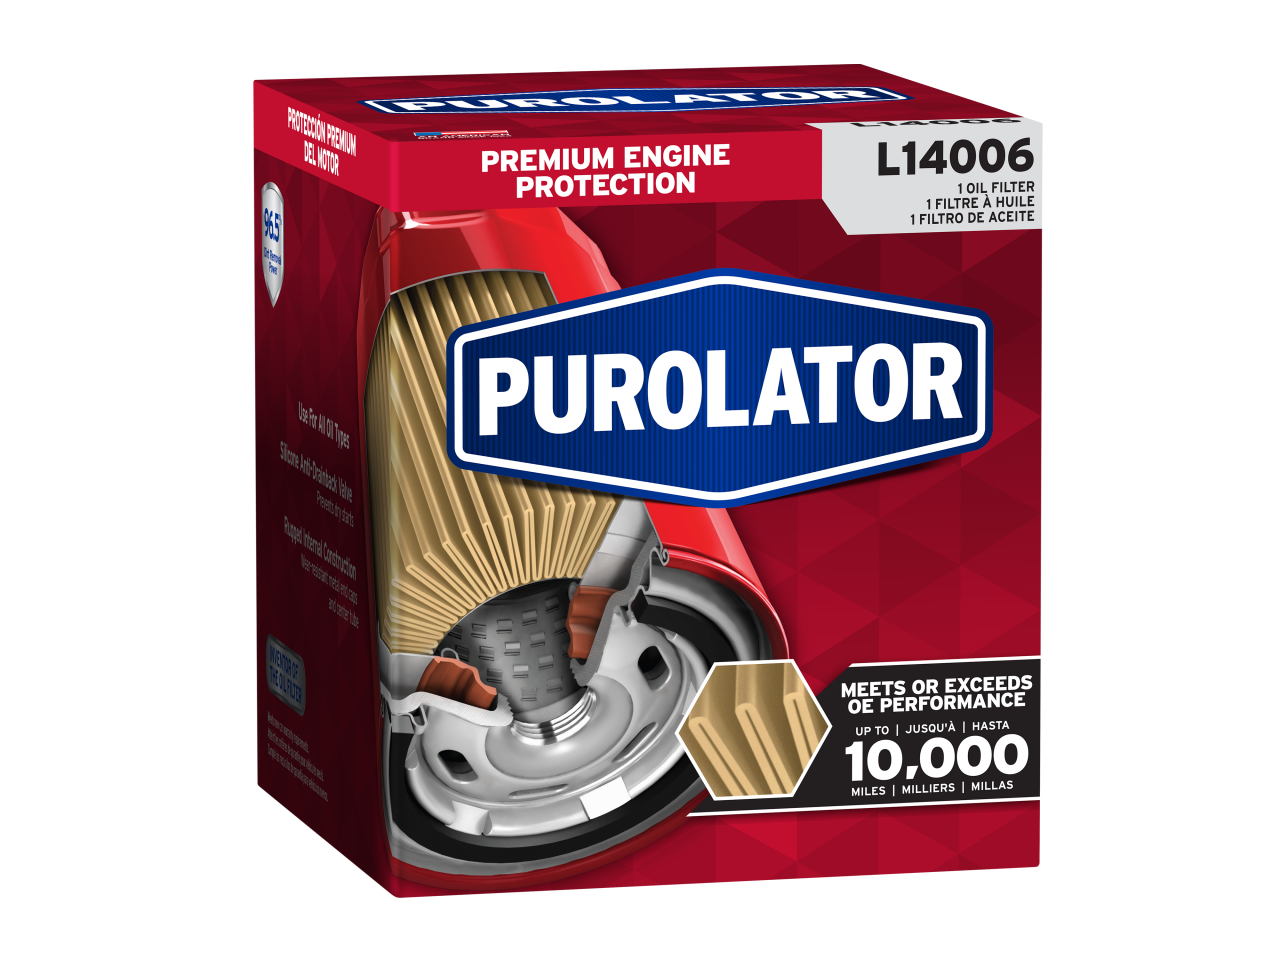 Purolator Oil Filters are engineered to meet original factory performance for up to 5,000 miles of premium engine protection.